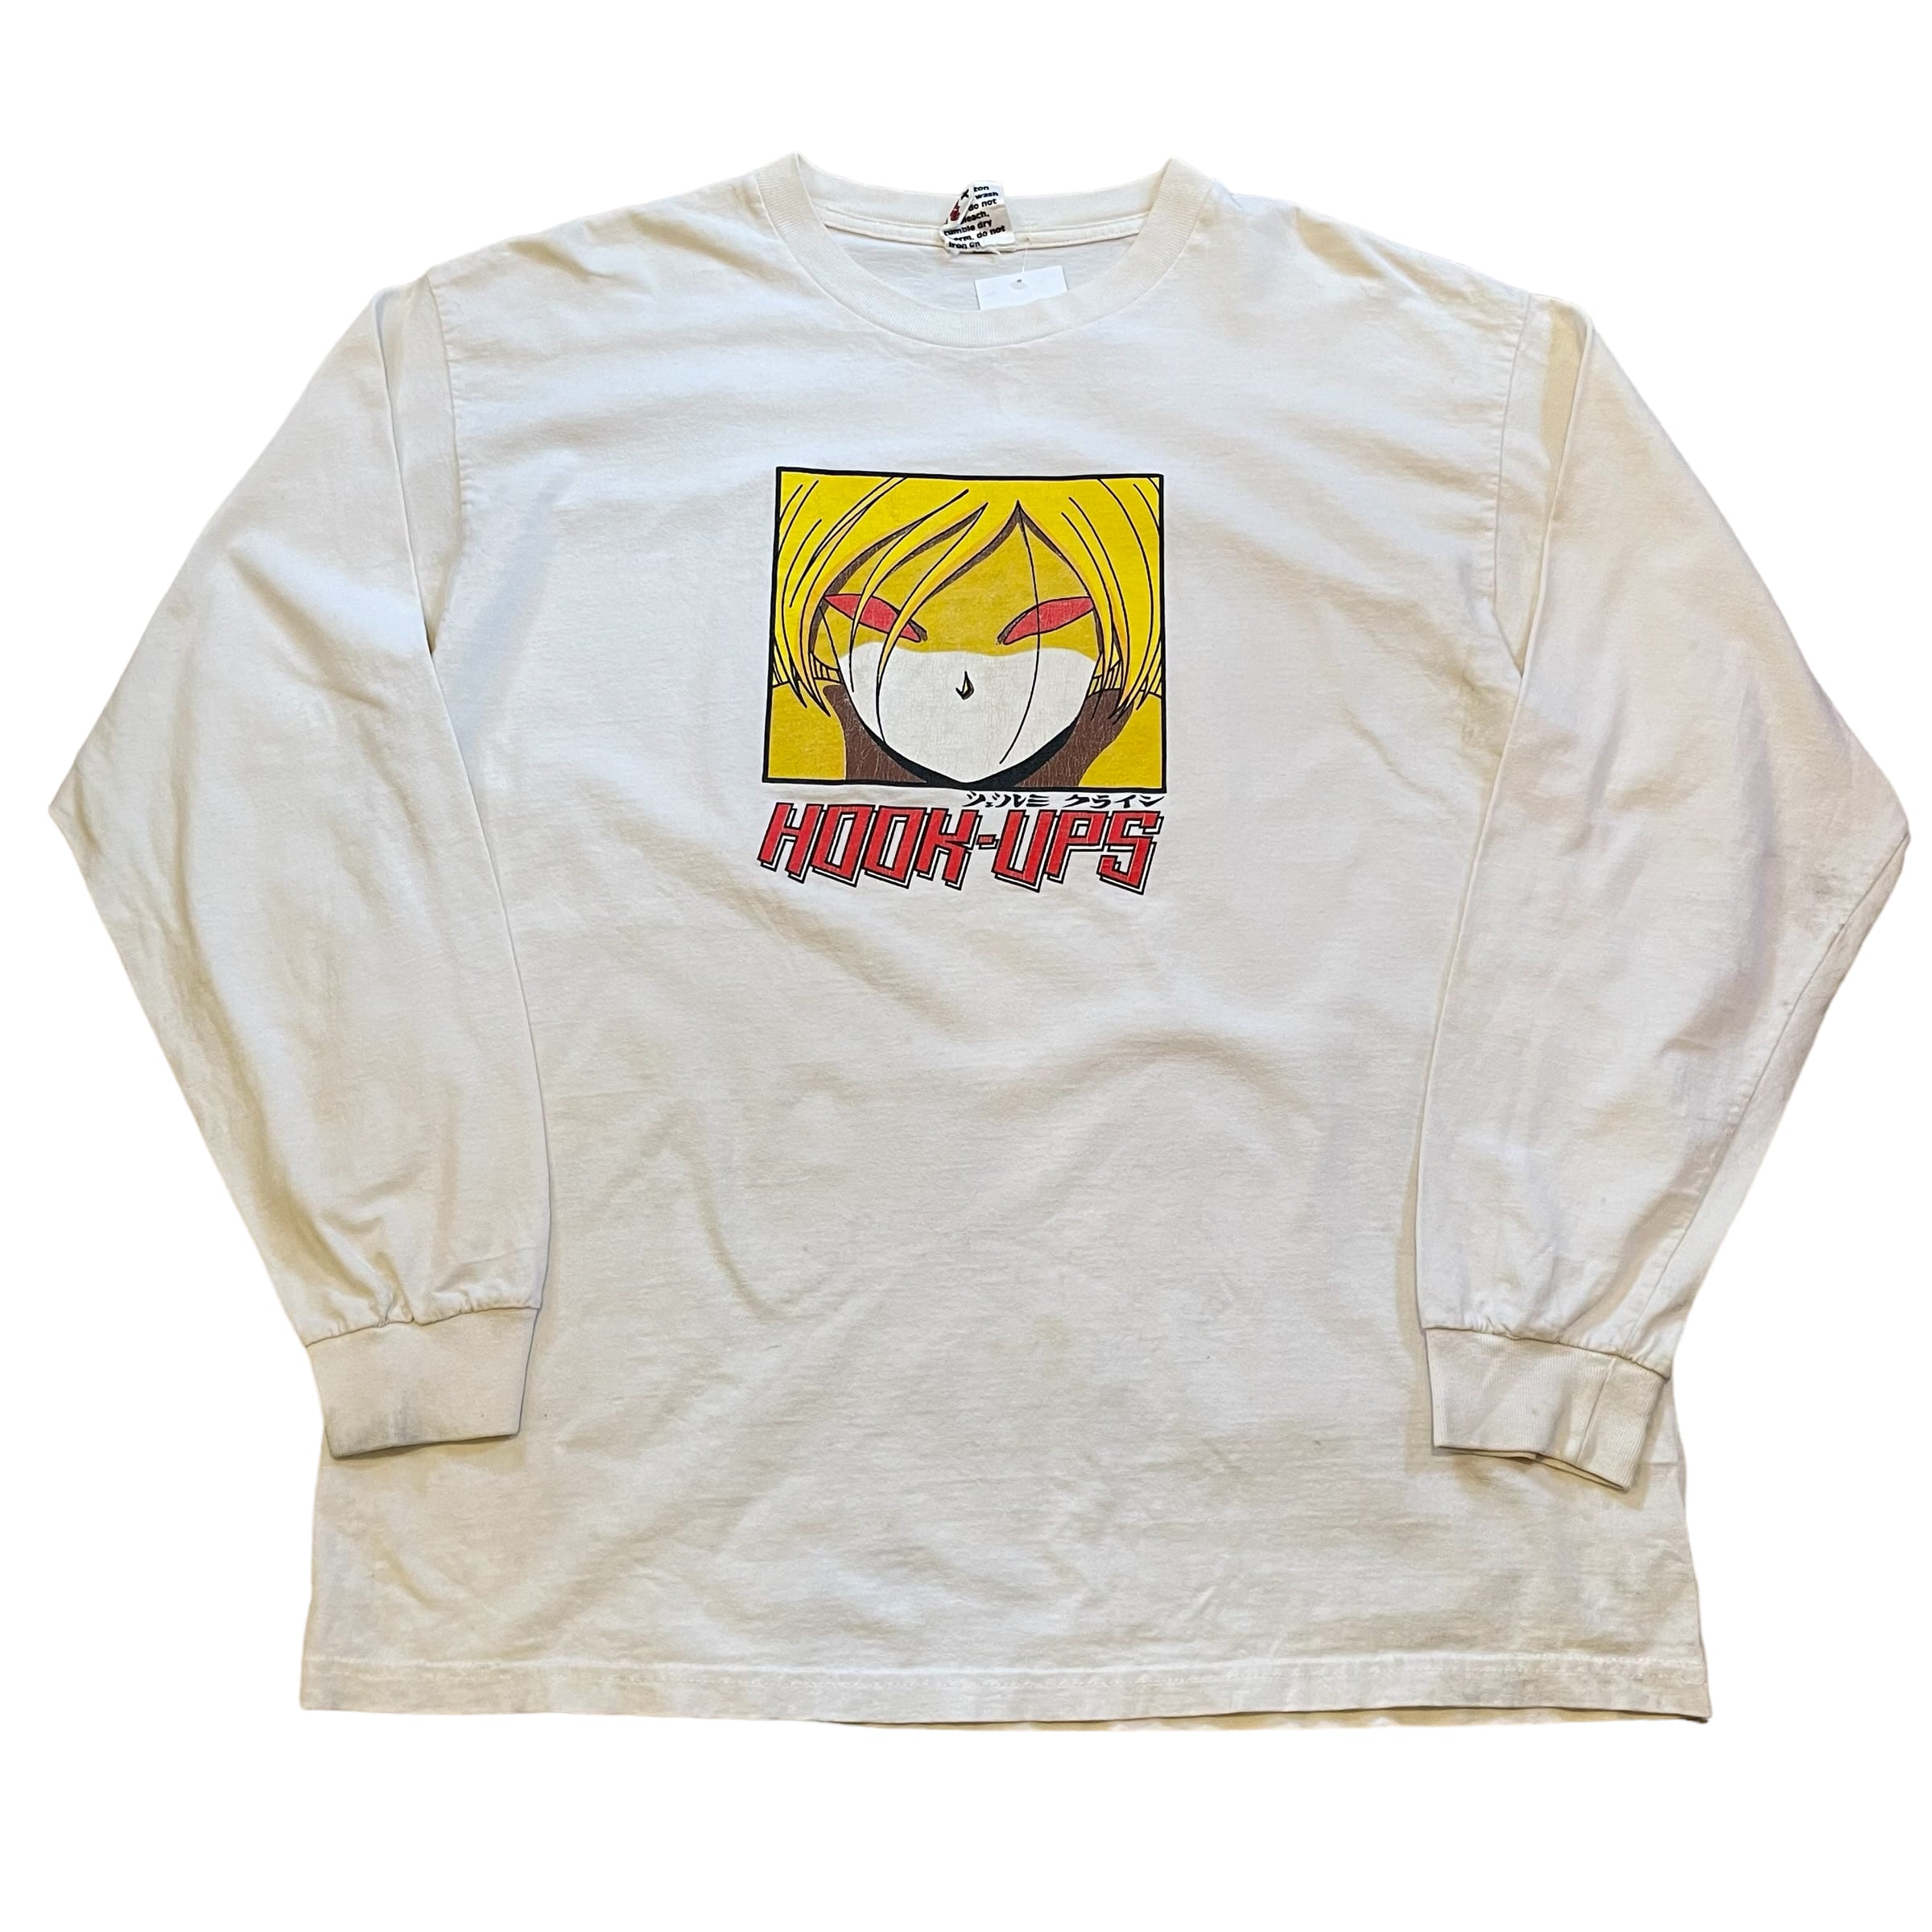 90s HOOK-UPS L/S T-shirt | What’z up powered by BASE